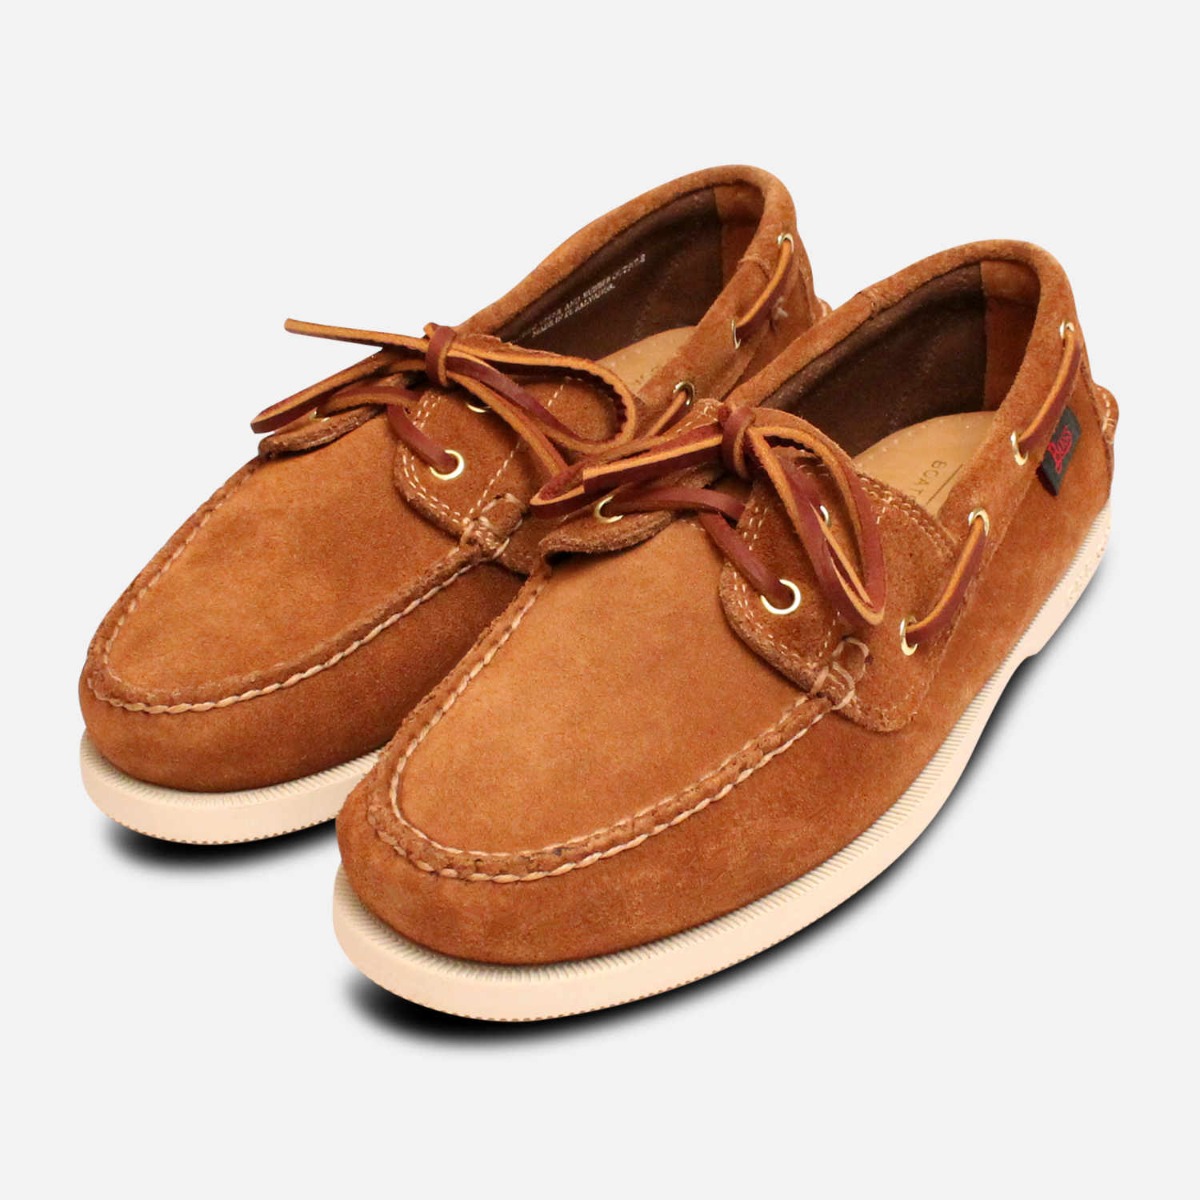 Luxury Light Brown Suede Bass Boat Shoes for Men | eBay